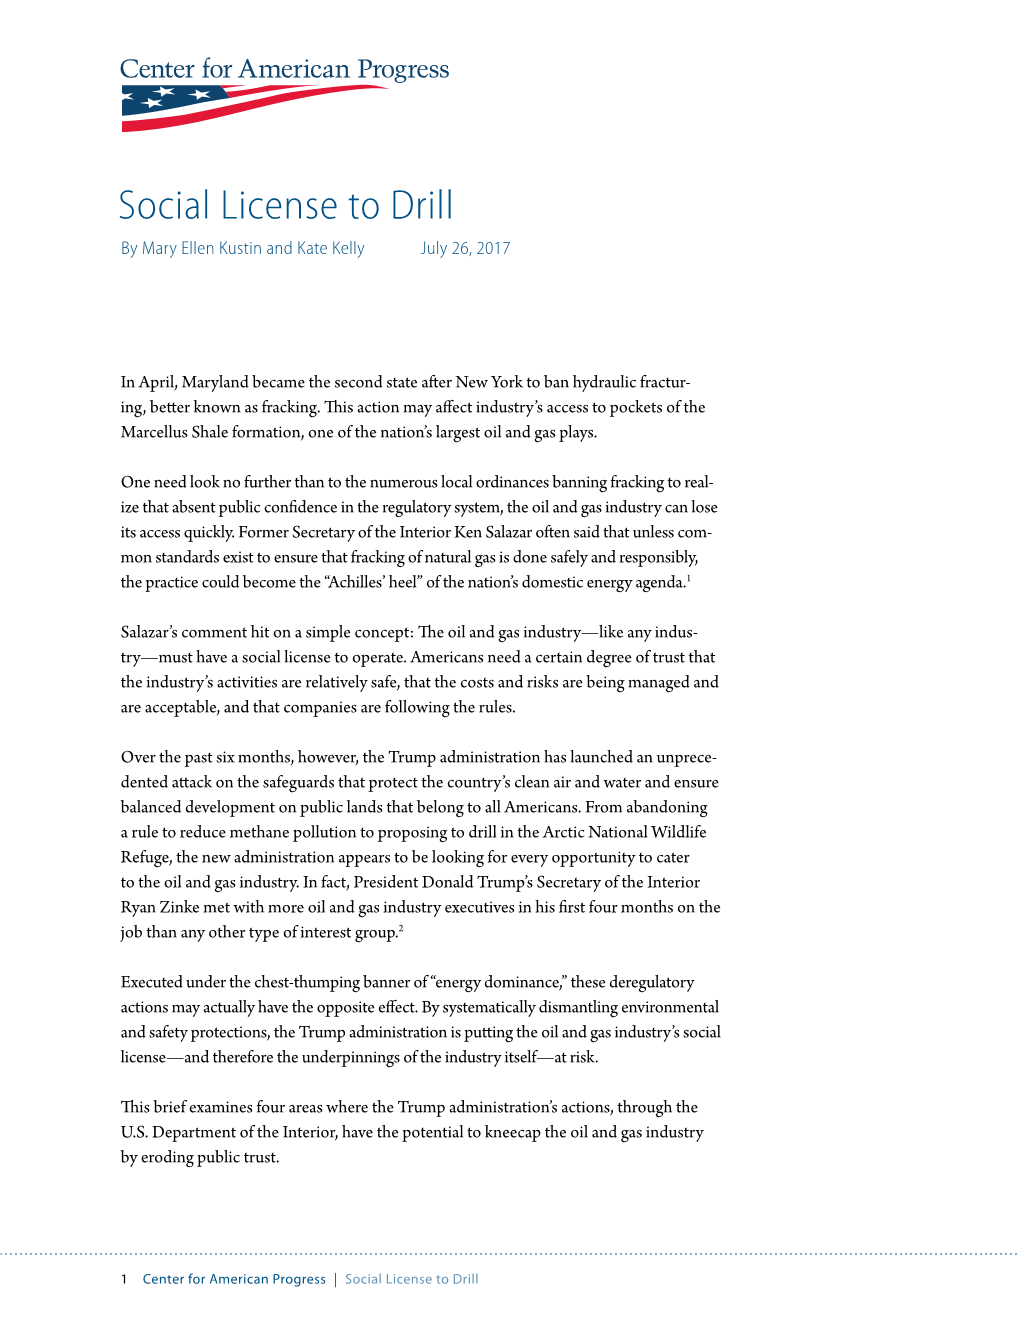 Social License to Drill by Mary Ellen Kustin and Kate Kelly July 26, 2017